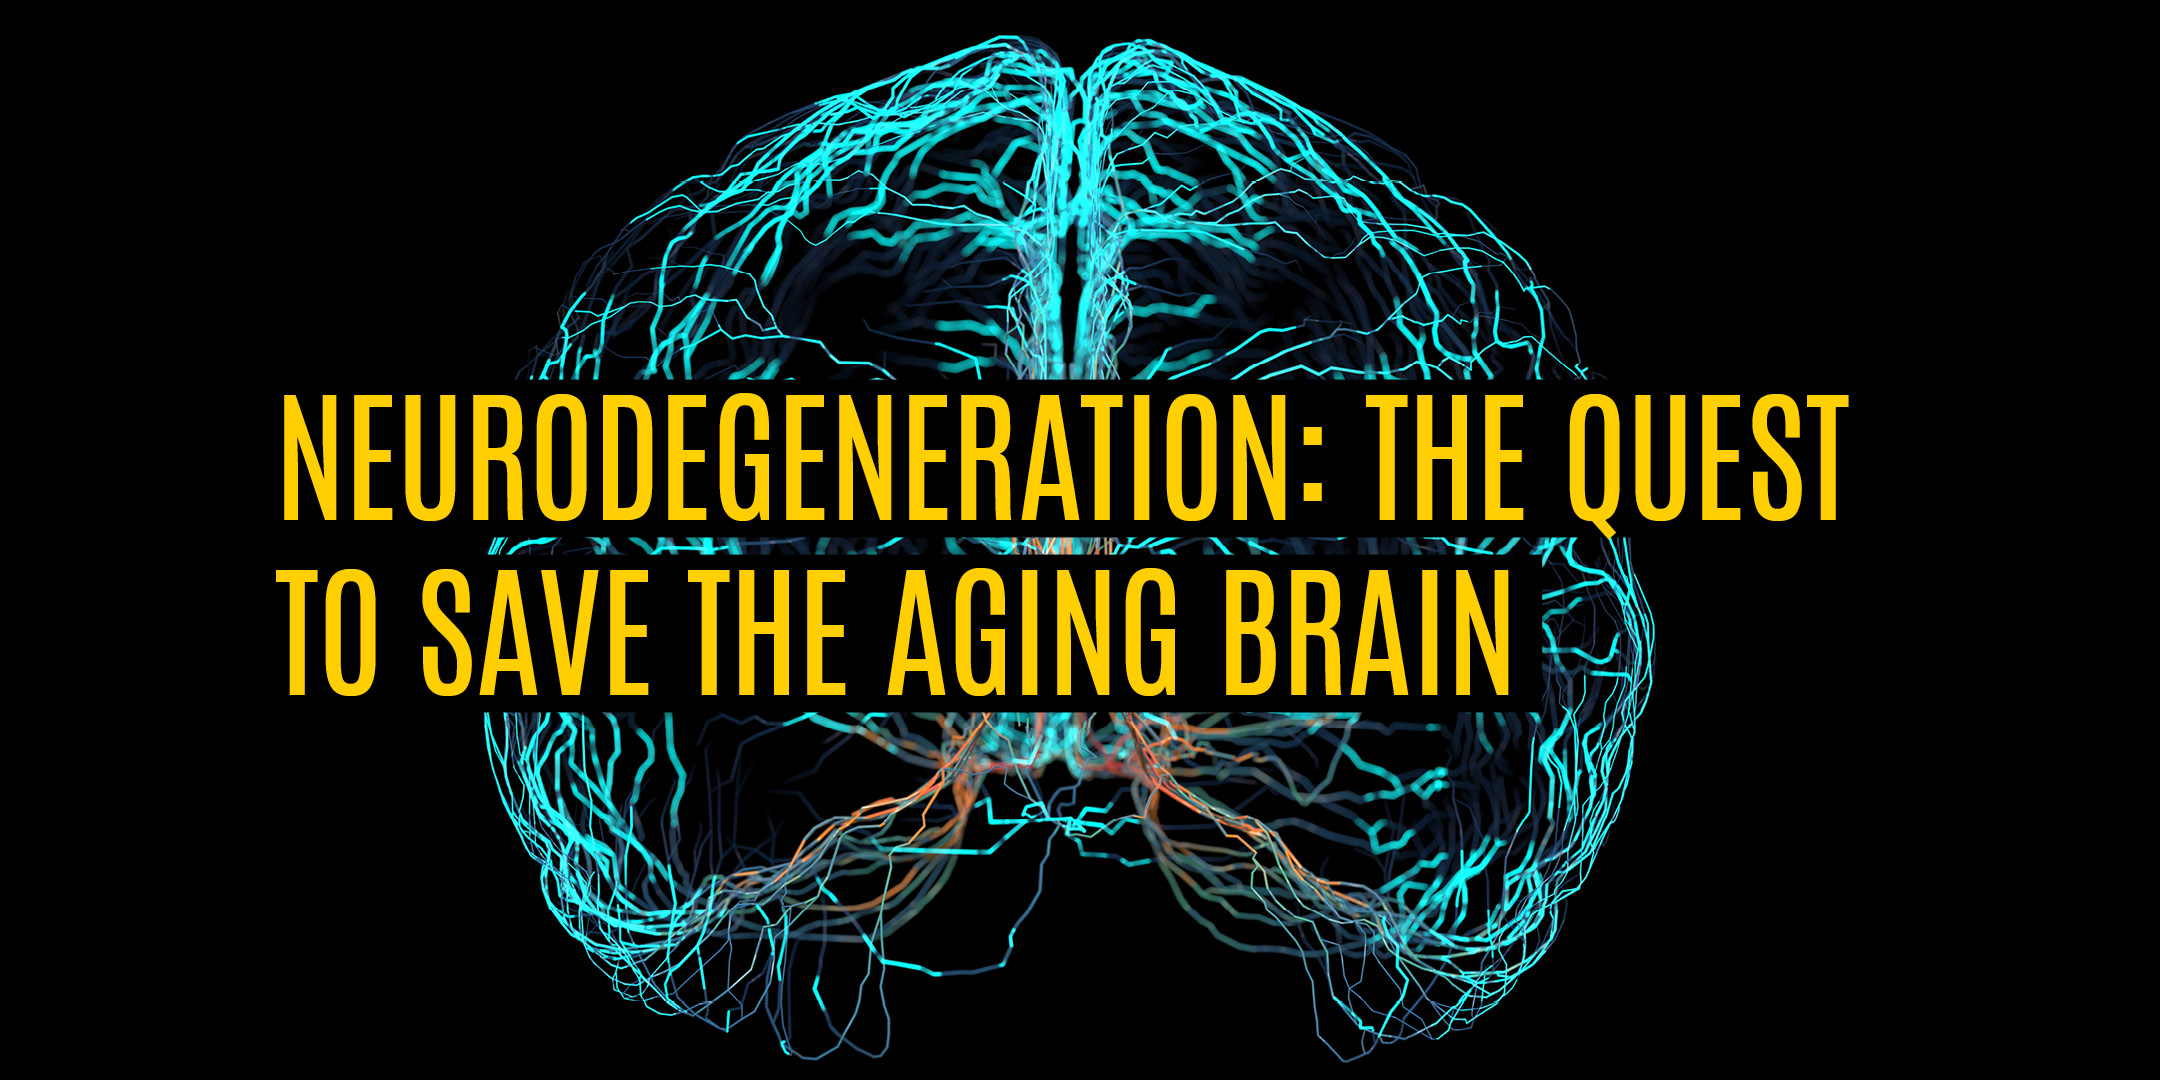 Neurodegeneration: The Quest to Save the Aging Brain